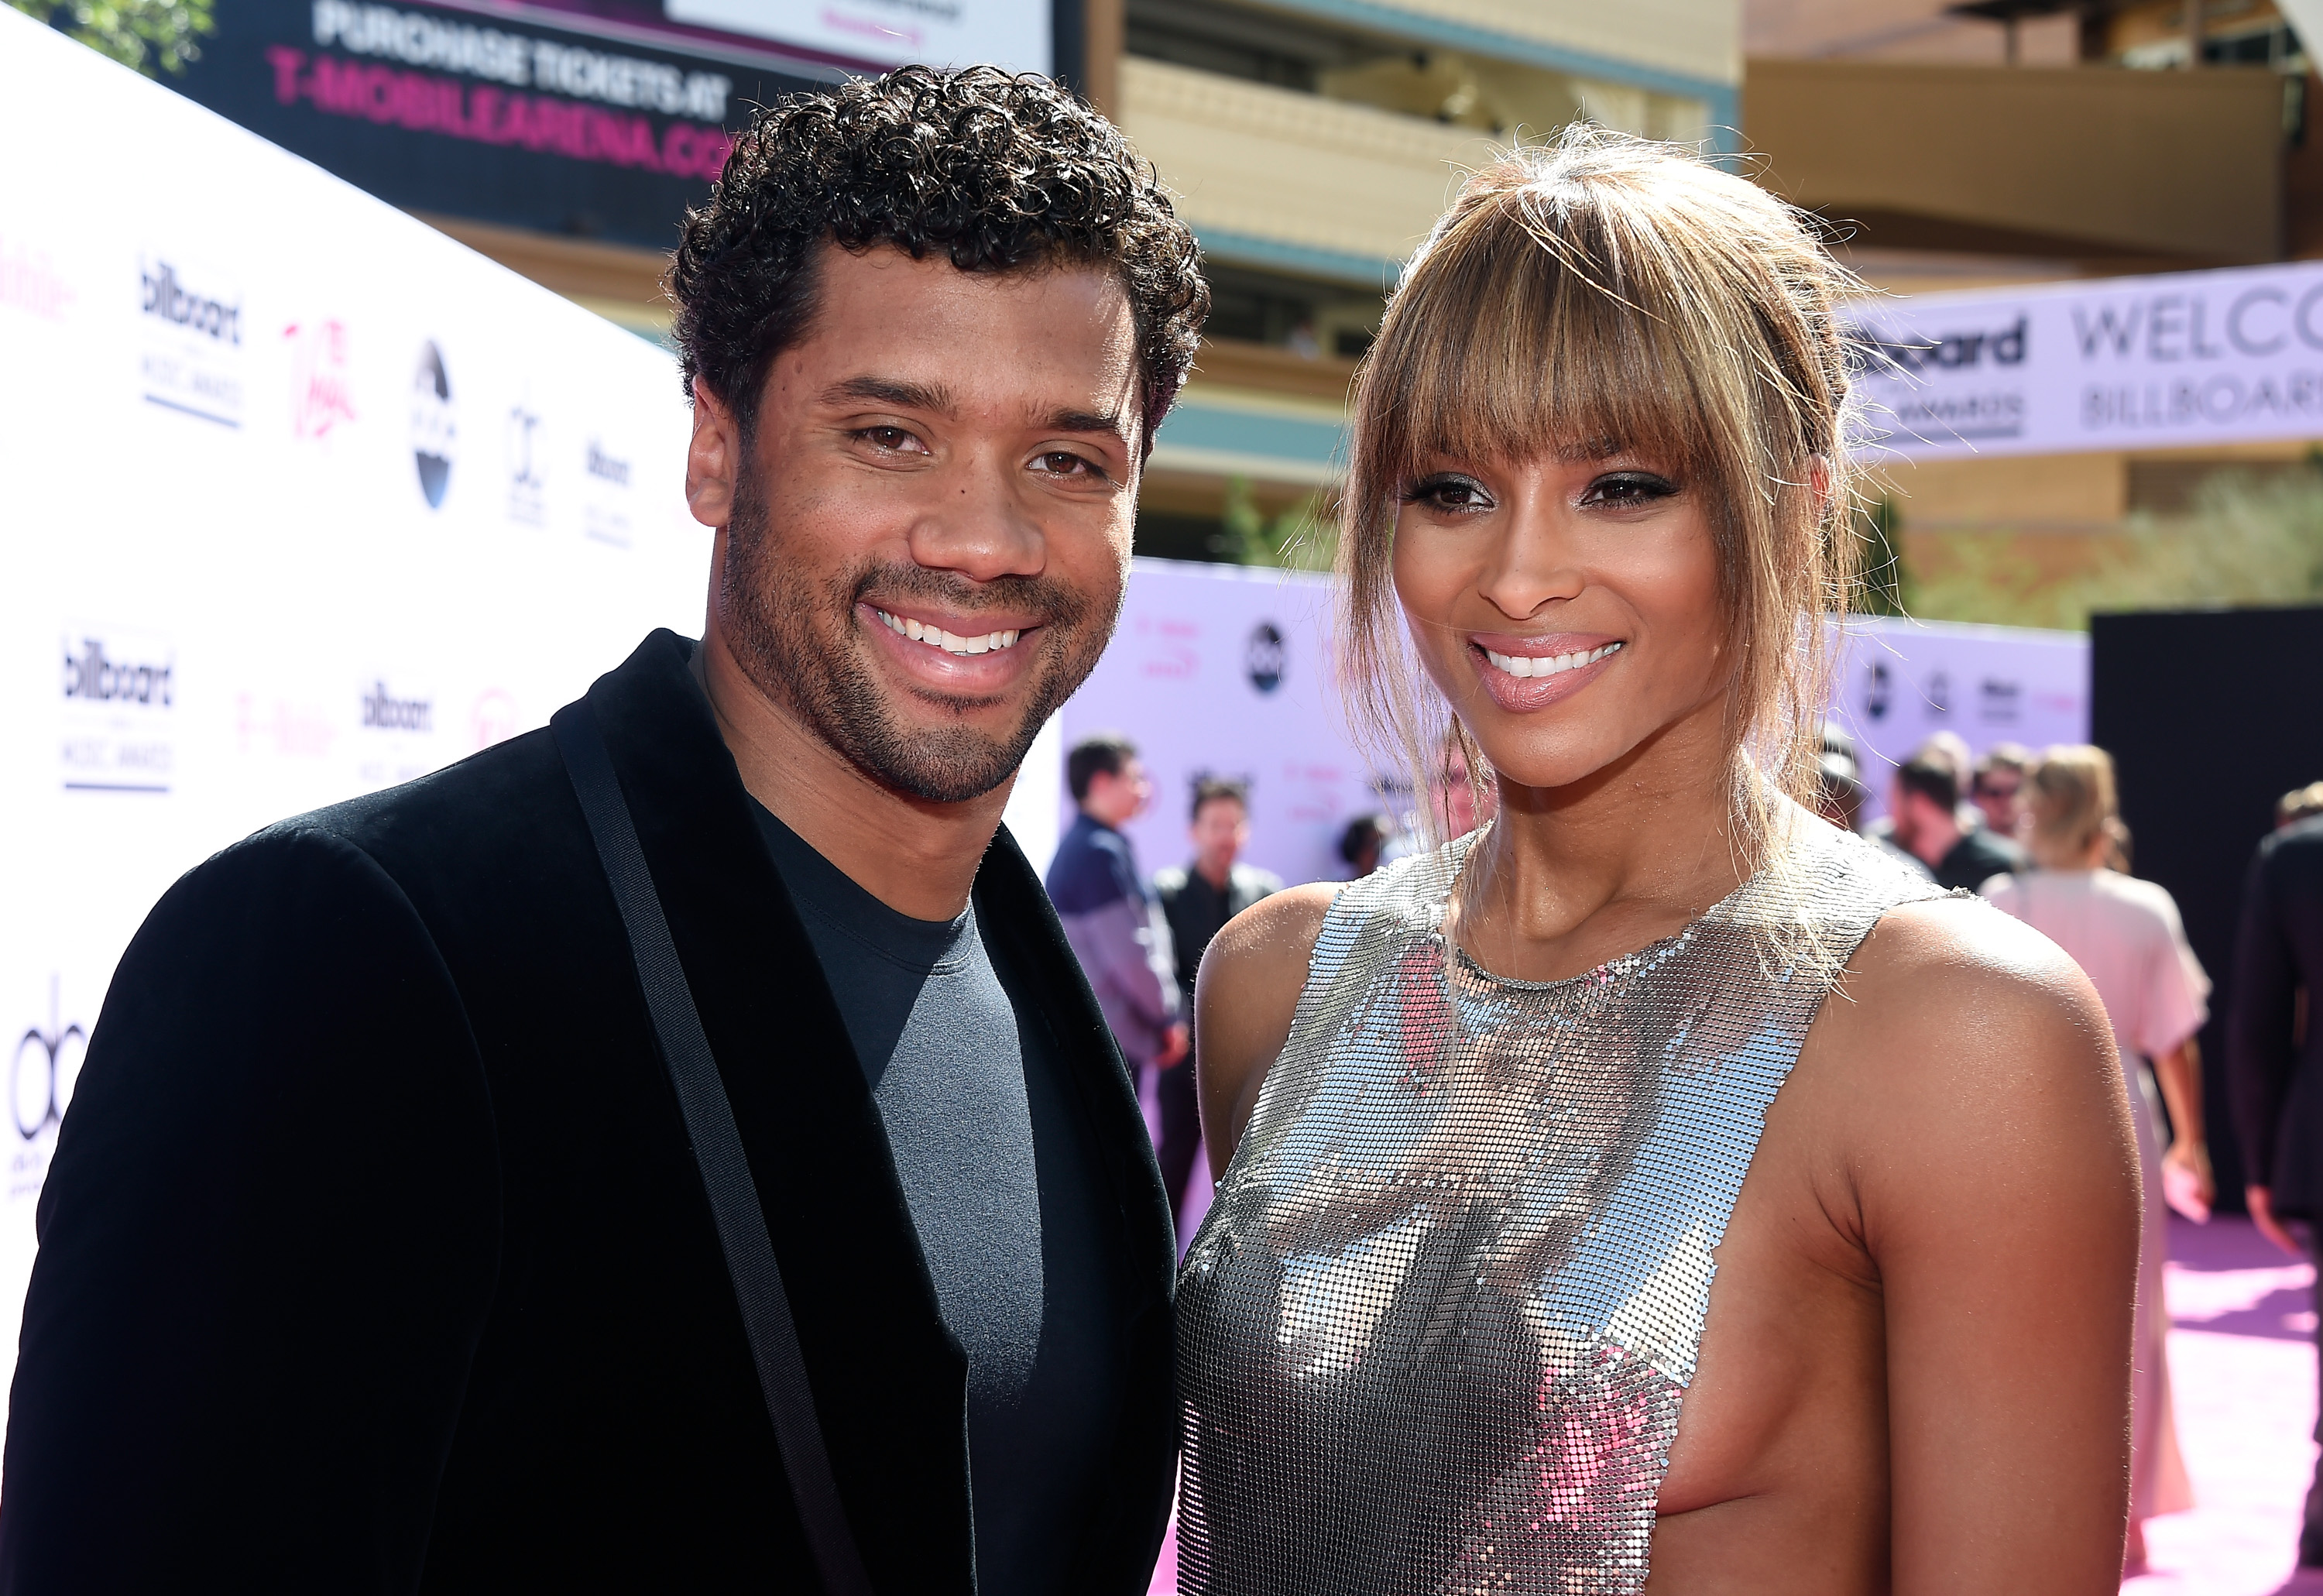 LAS VEGAS, NV - MAY 22:  NFL player Russell Wilson and singer/co-host Ciara attend the 2016 Billboard Music Awards at T-Mobile Arena on May 22, 2016 in Las Vegas, Nevada.  (Photo by Frazer Harrison/BBMA2016/Getty Images for dcp) (Frazer Harrison/BBMA2016Getty Images for dcp)